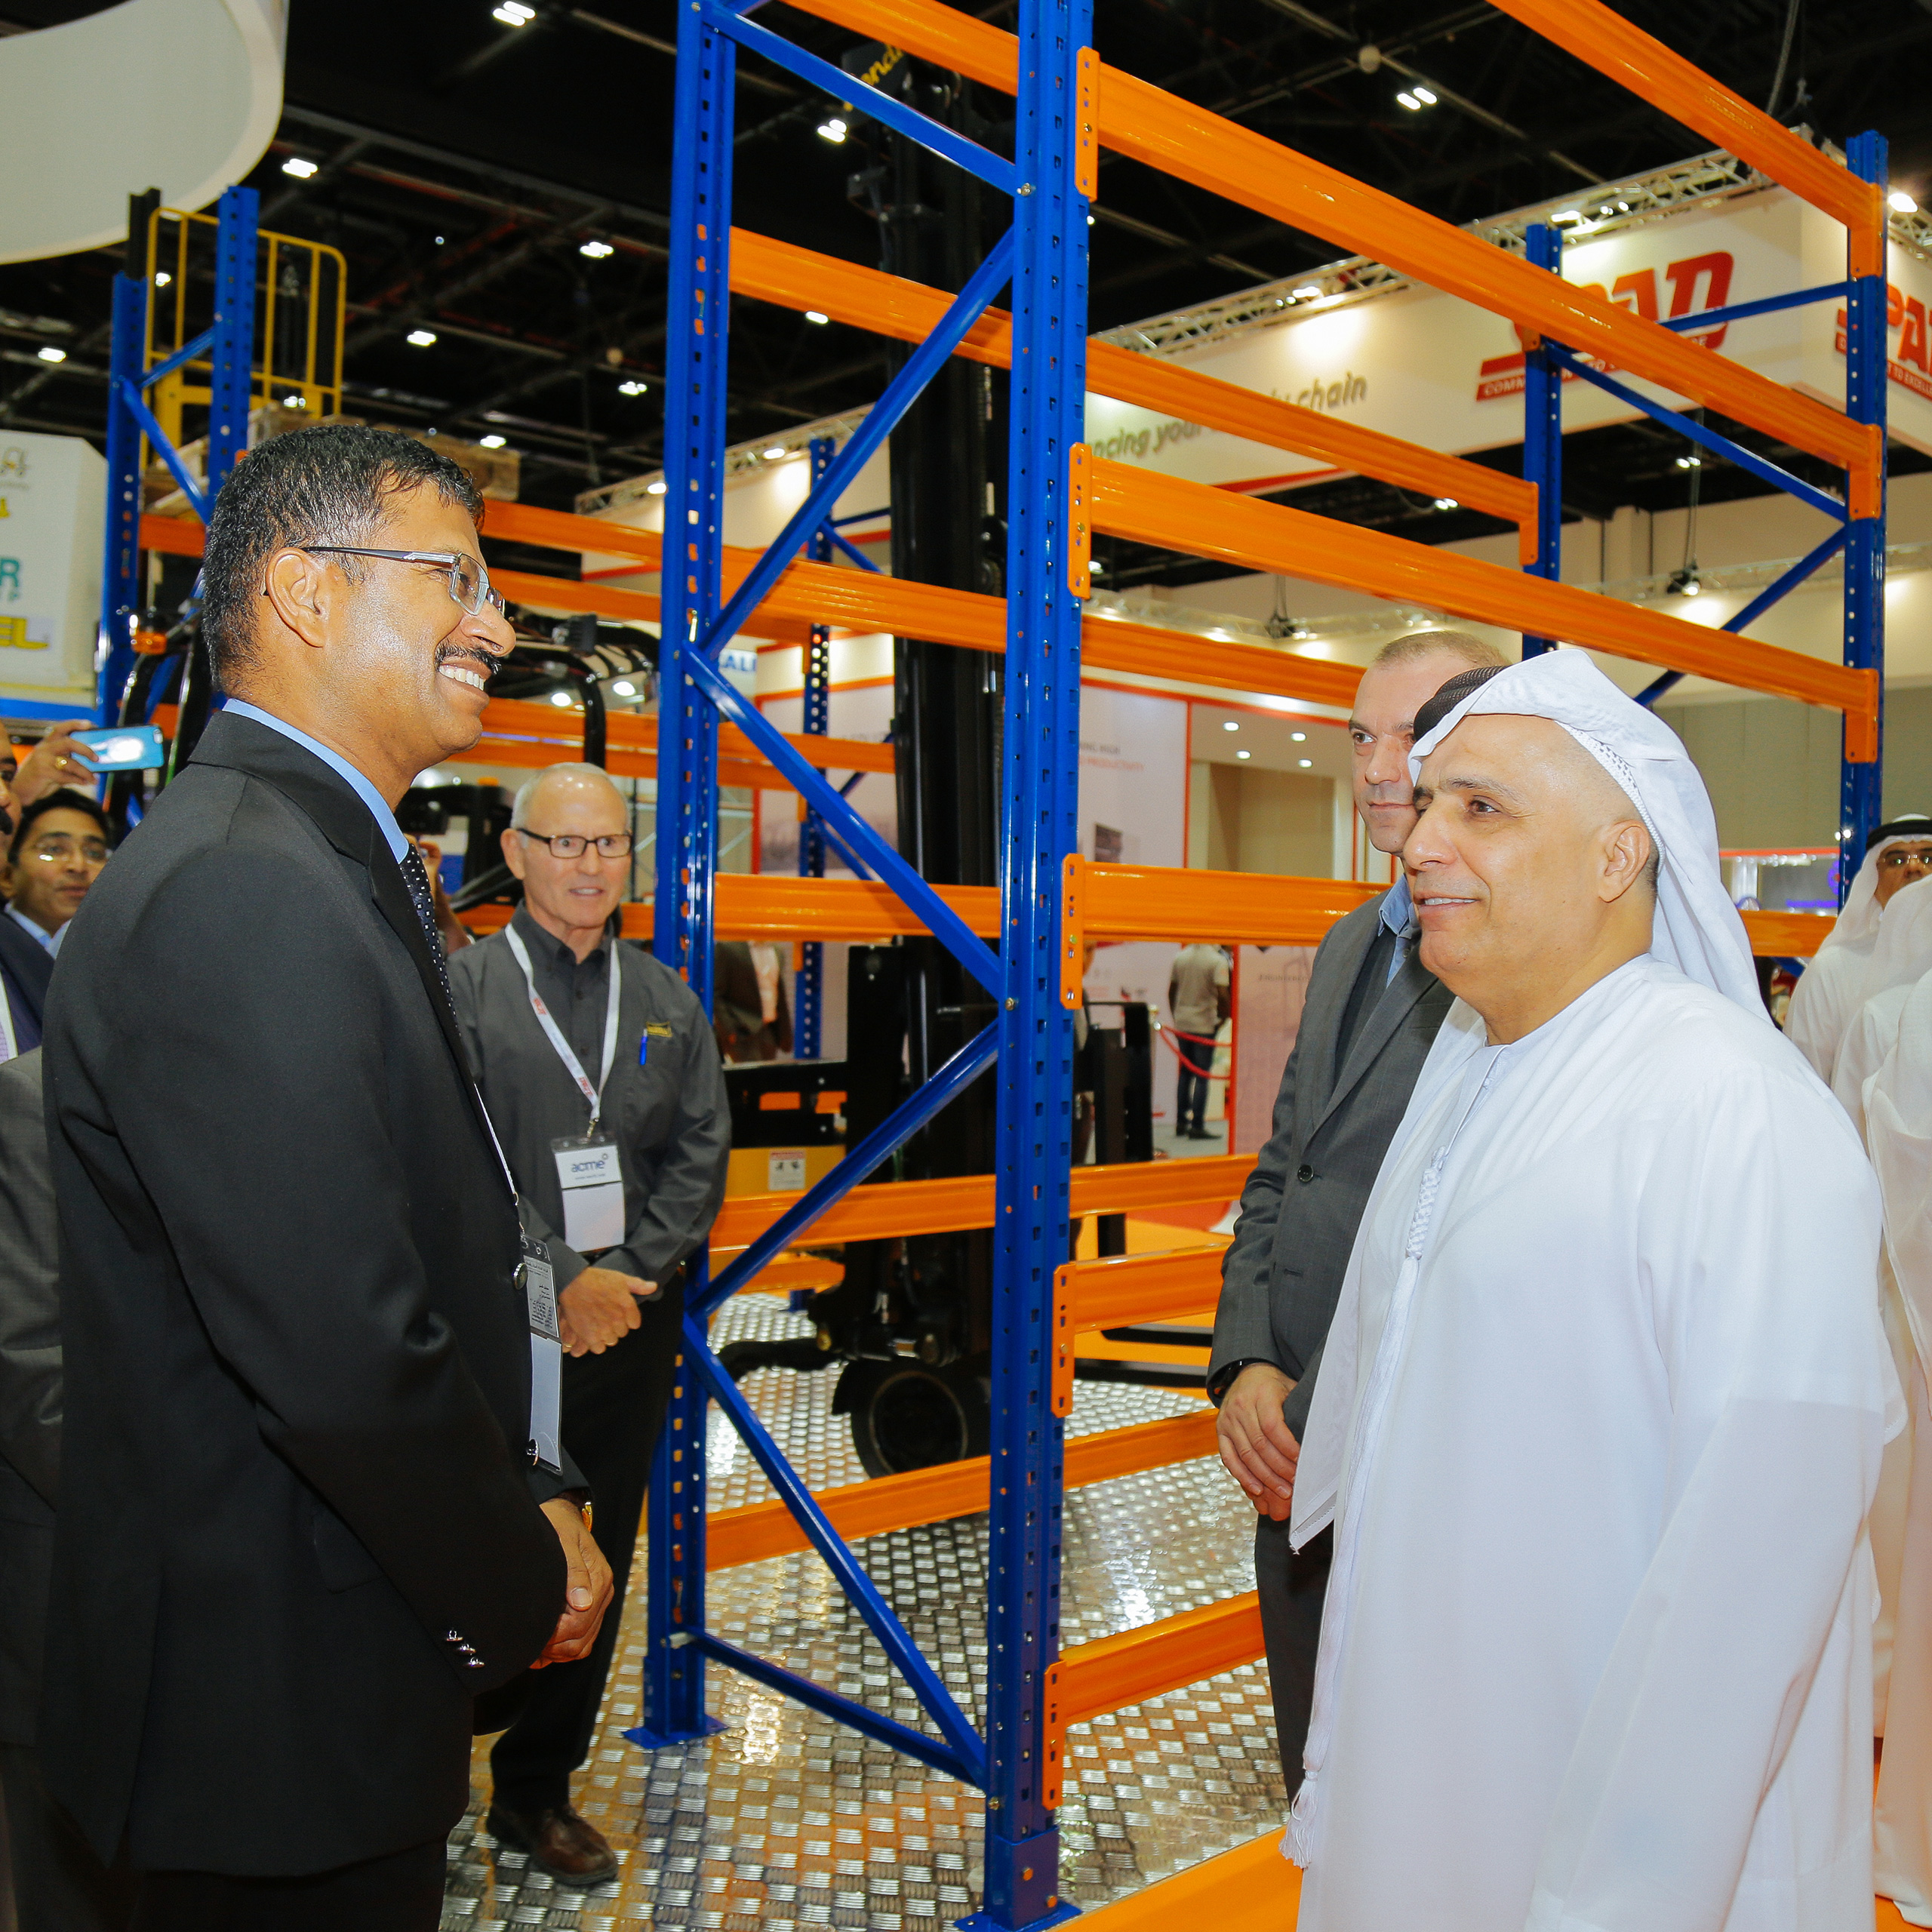 Materials Handling Middle East - Materials Handling Middle East 2017 opens in Dubai featuring 126 exhibitors from 20 countries